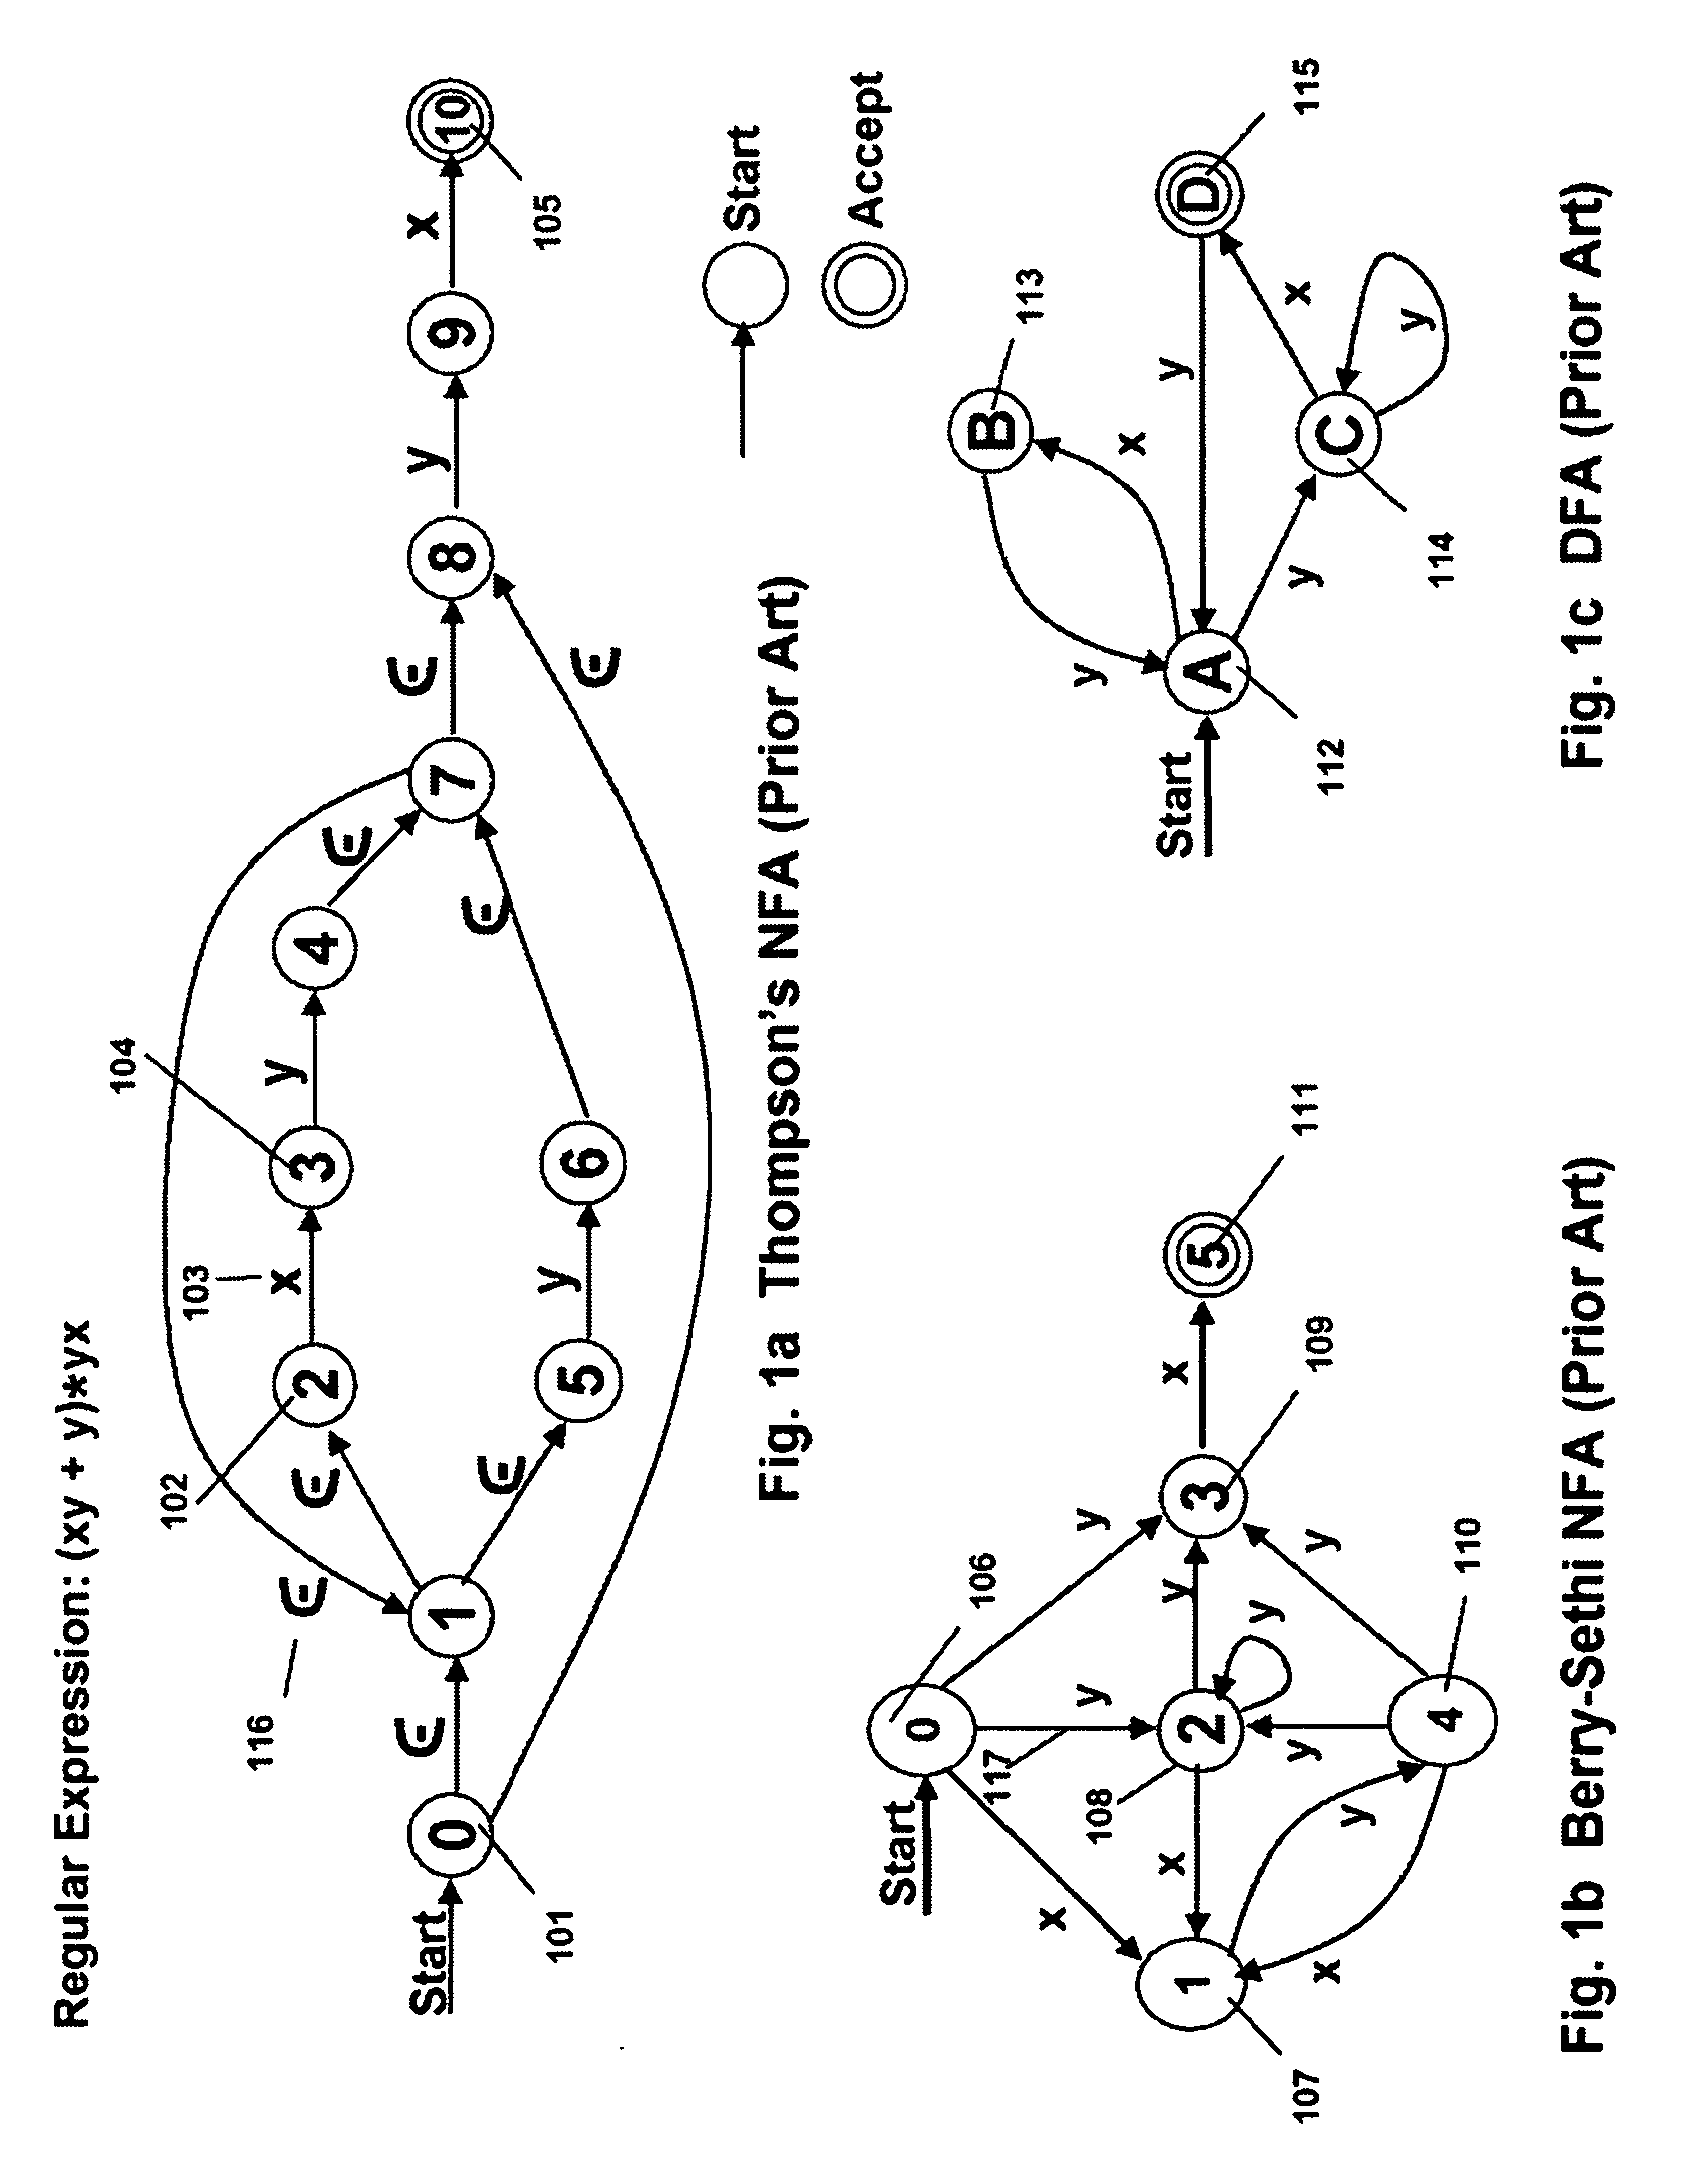 FSA Extension Architecture for Programmable Intelligent Search Memory